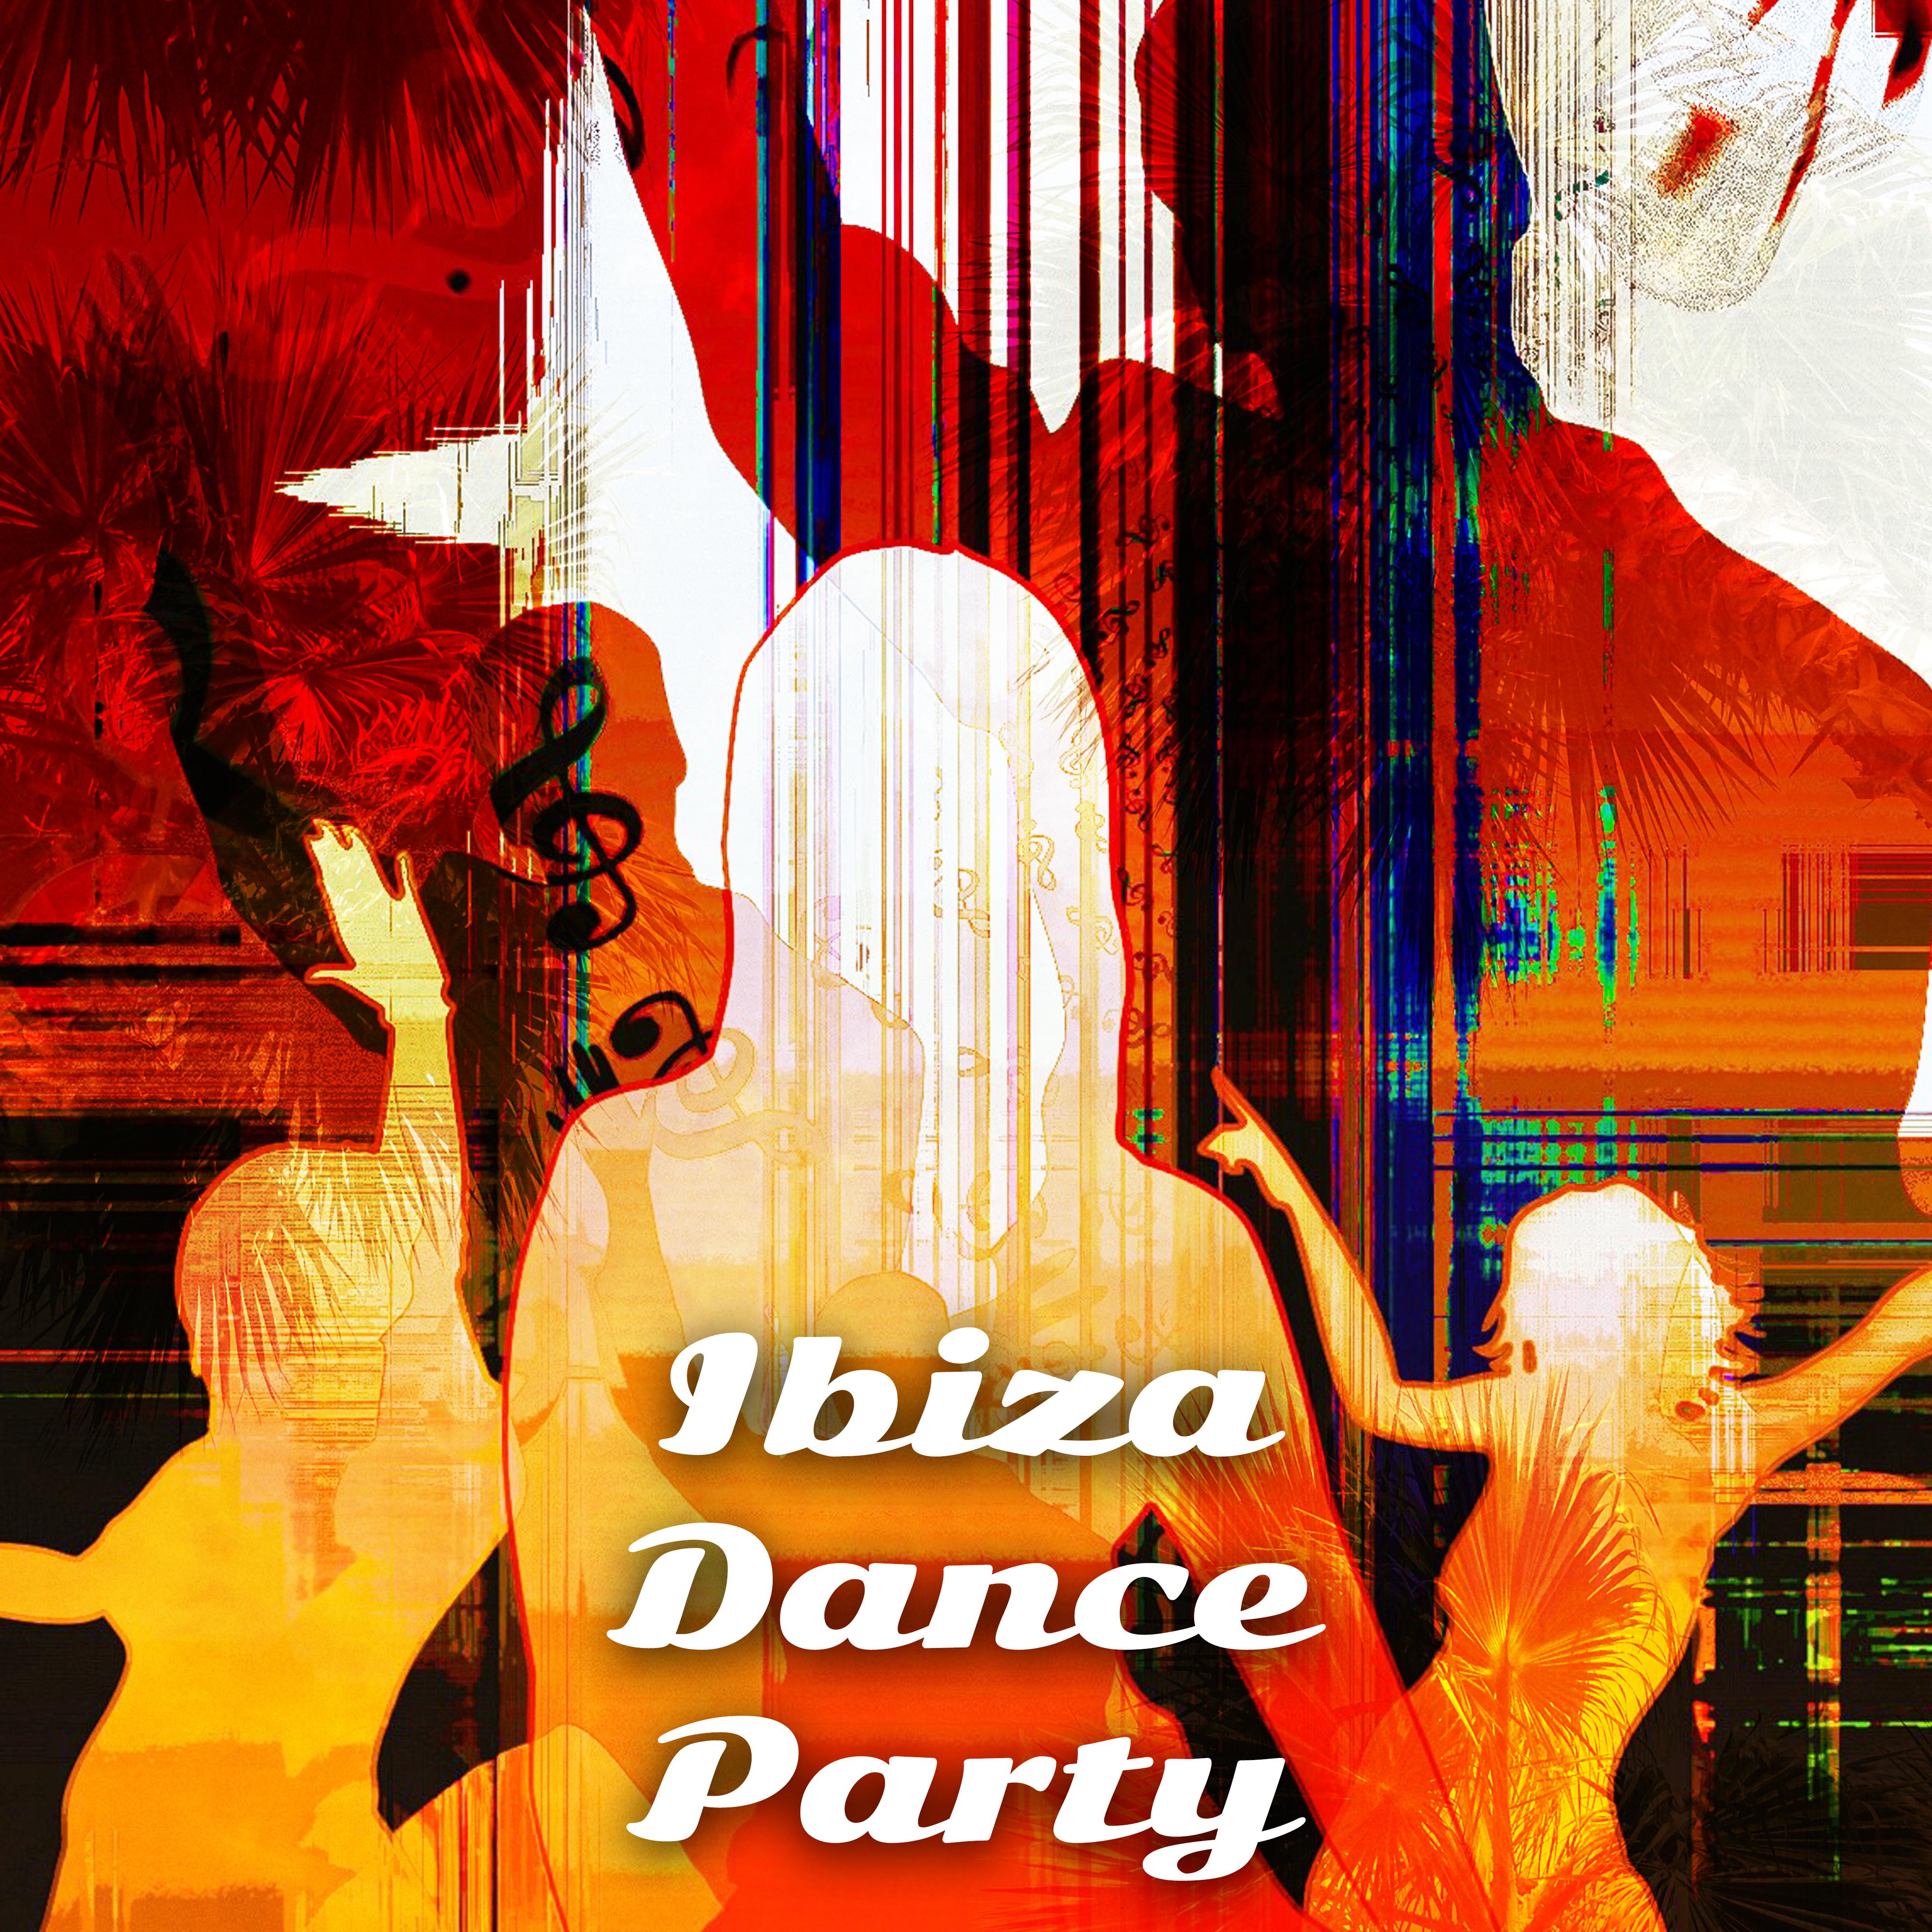 Ibiza Dance Party  Summer Chill, Dancefloor, Time to Party, Beach Chill,  Vibes, Electronic Music, Holiday Chill Out 2017